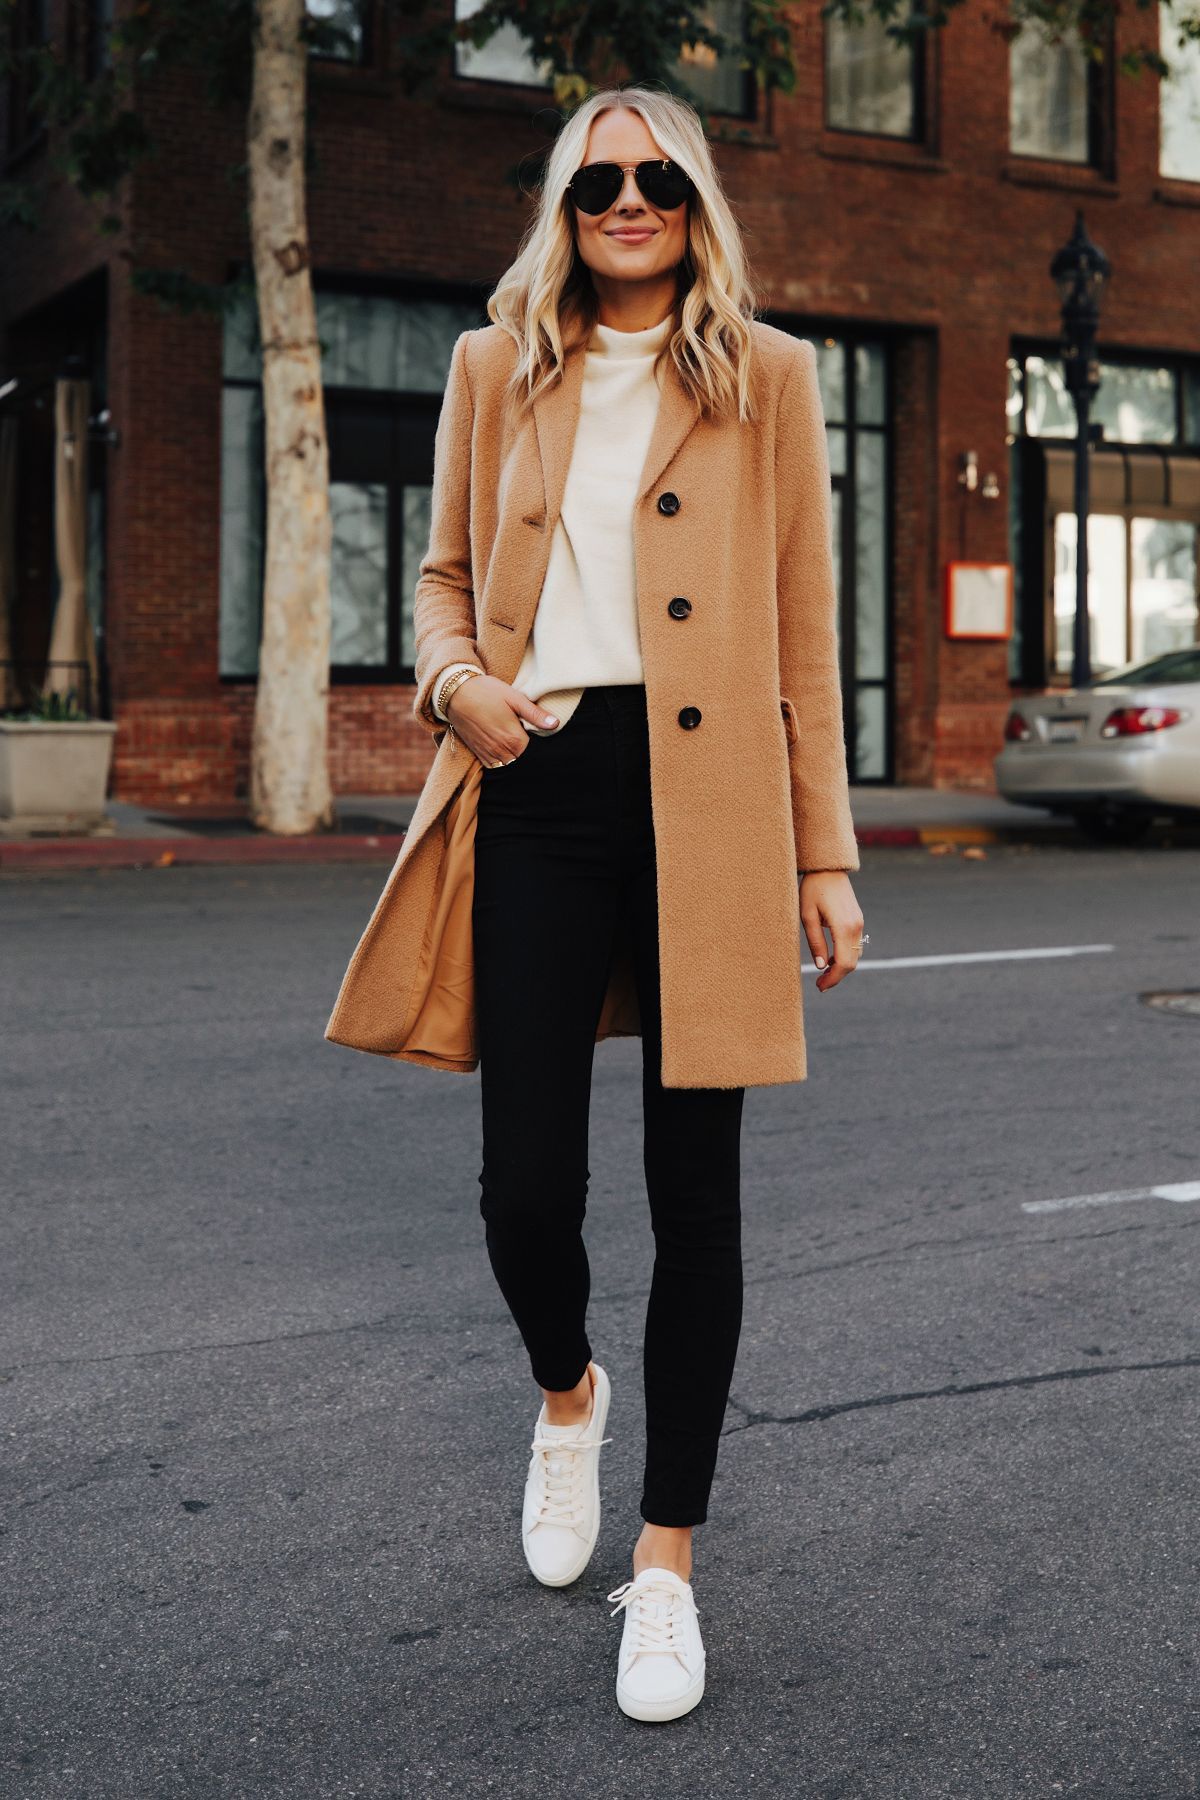 An Easy Outfit to Recreate With Your Camel Coat | Fashion Jackson - An Easy Outfit to Recreate With Your Camel Coat | Fashion Jackson -   13 classic style Winter ideas